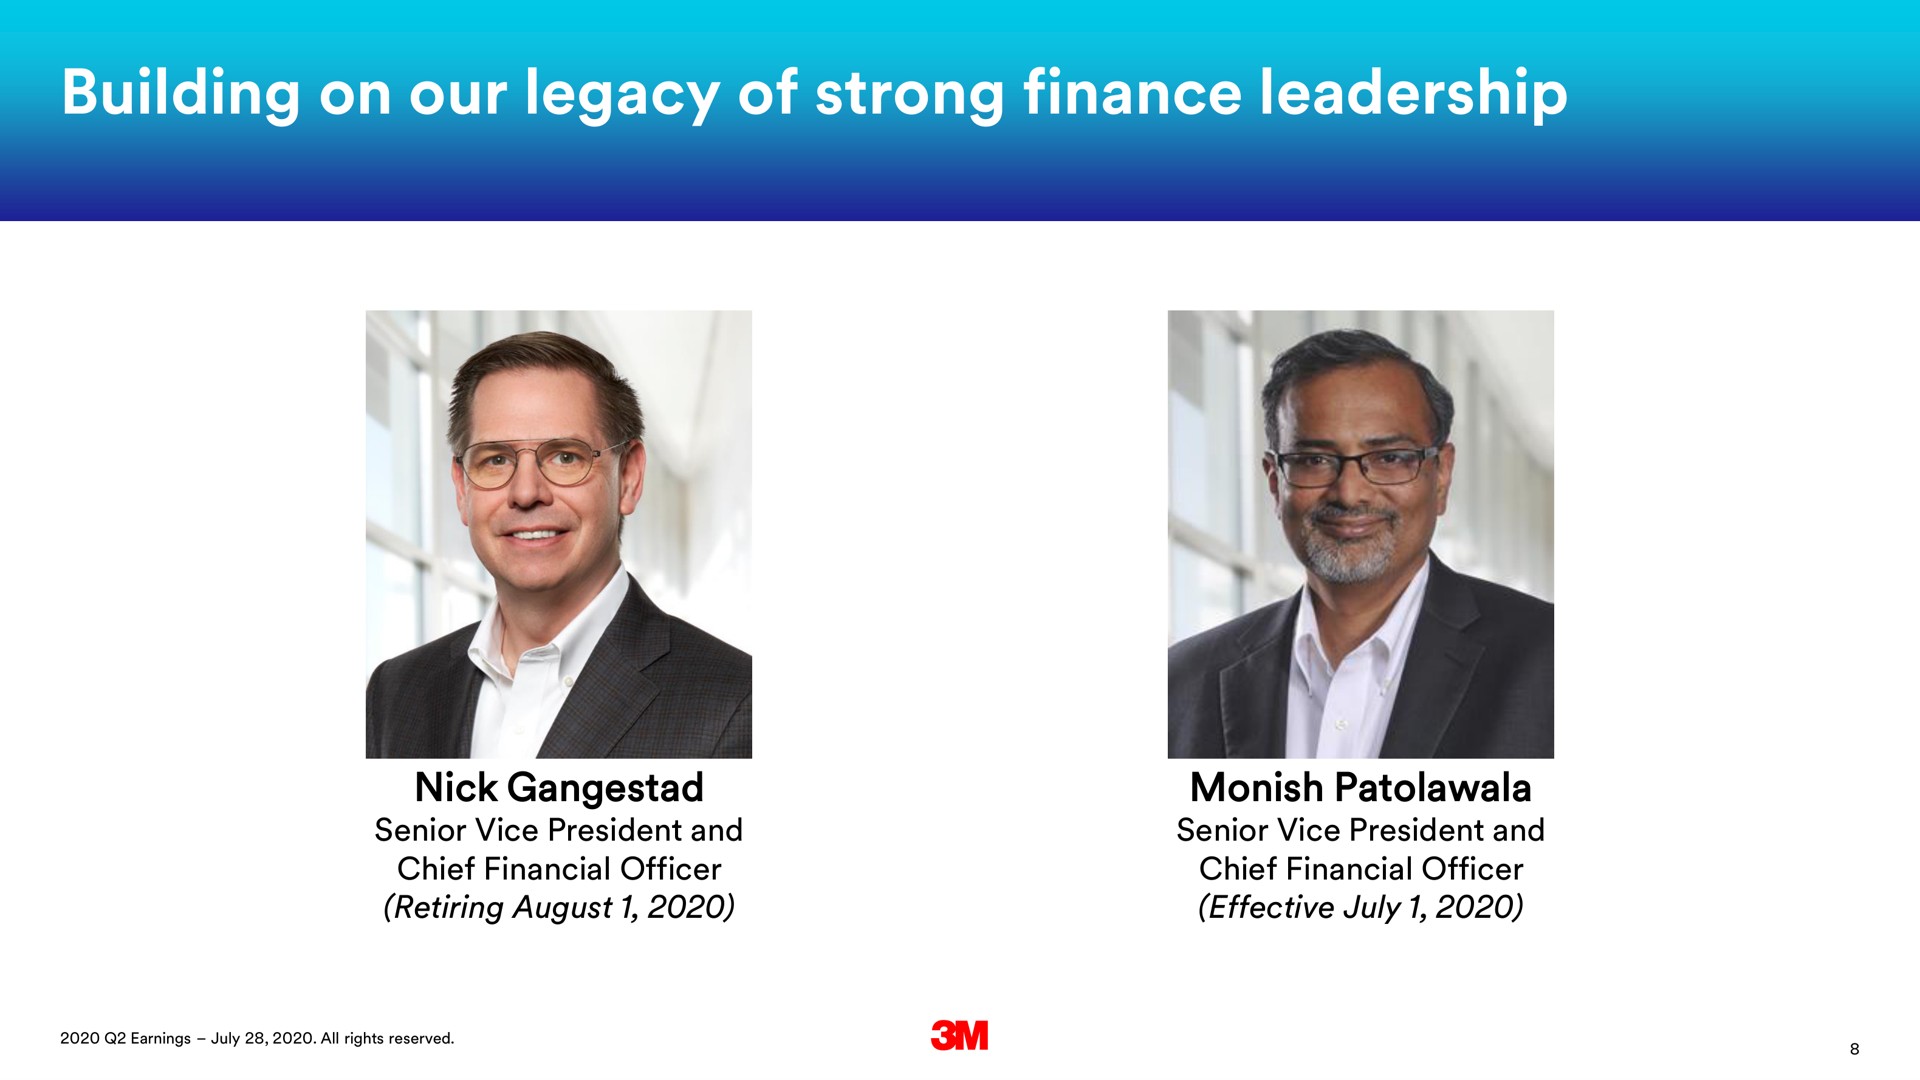 building on our legacy of strong finance leadership continuing legacy of strong finance leadership | 3M